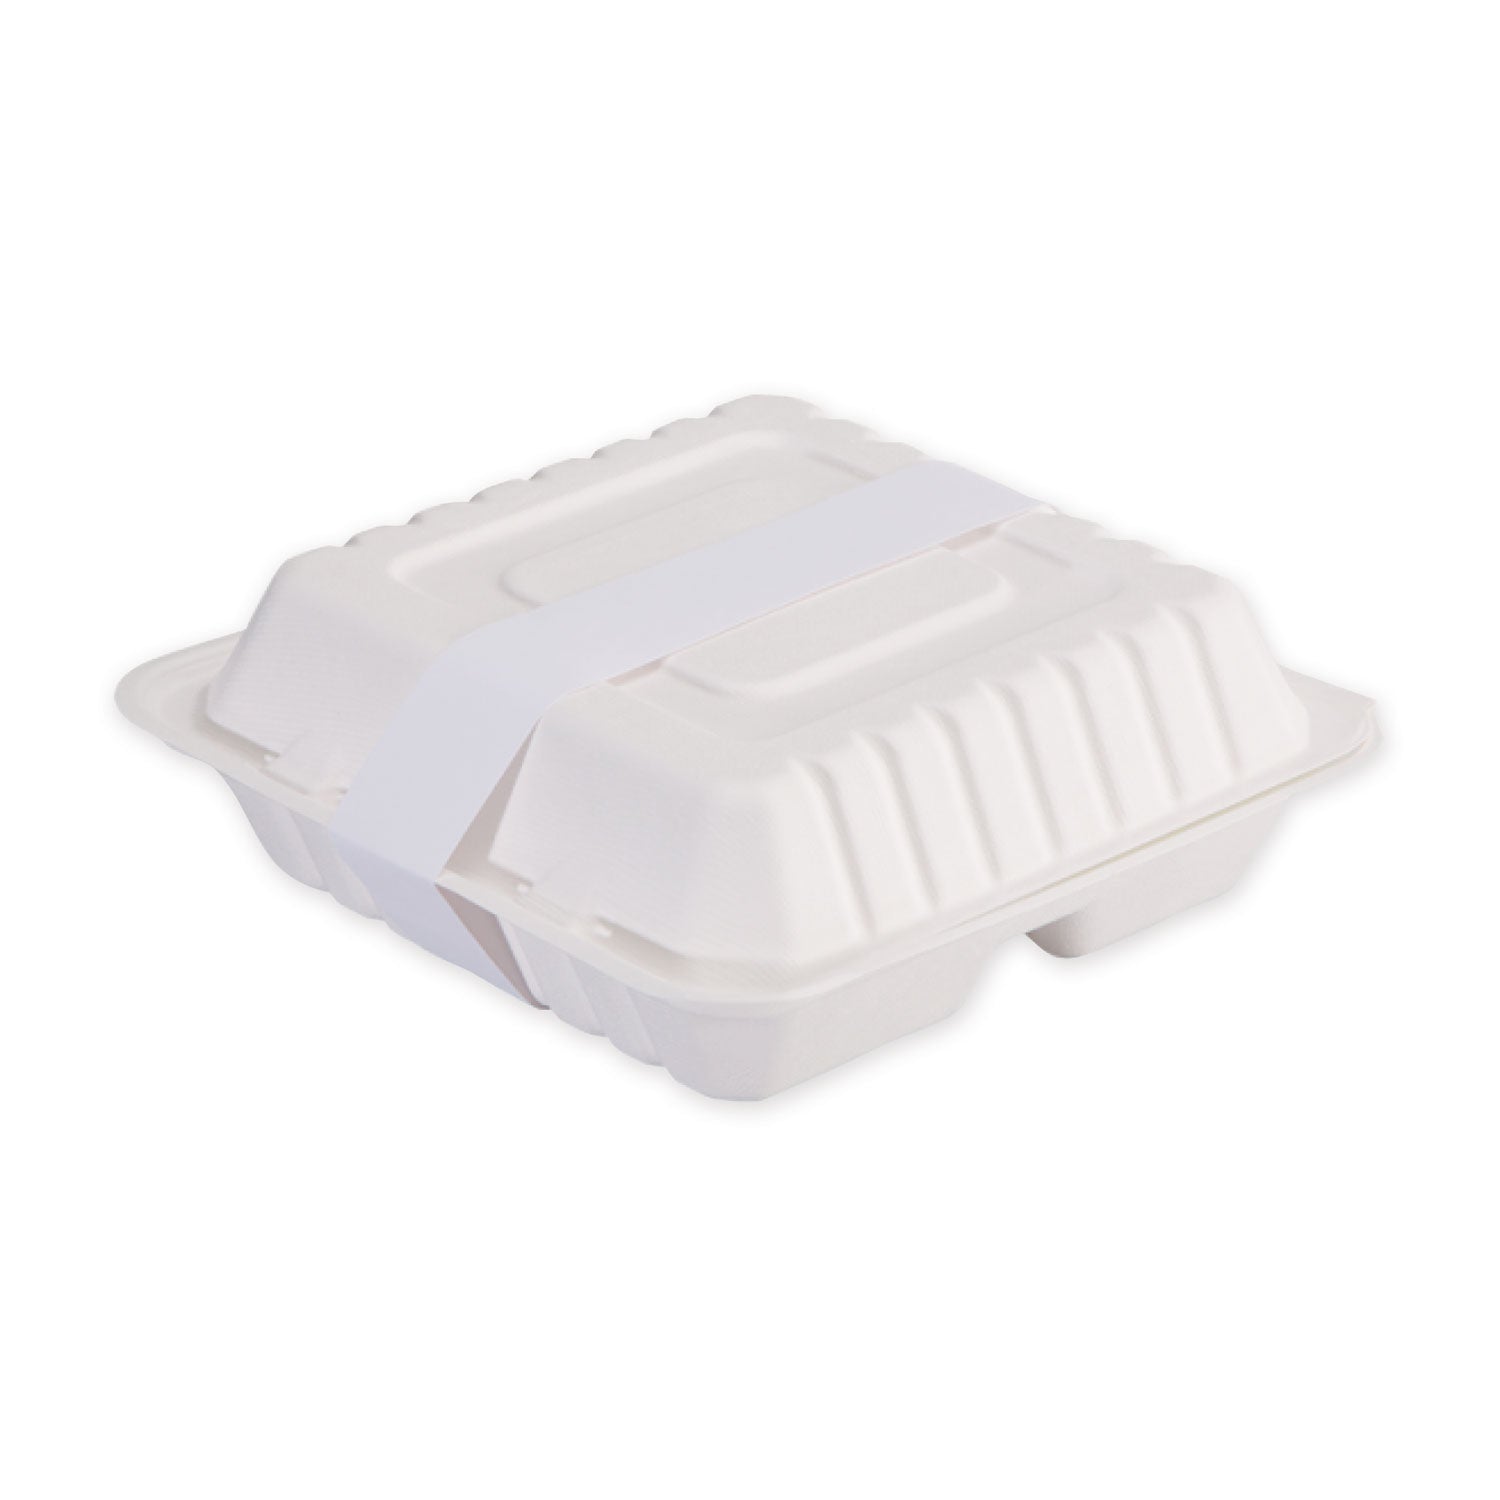 peel-and-seal-tamper-evident-food-container-bands-15-x-24-white-paper-2500-carton_hfm883173 - 2